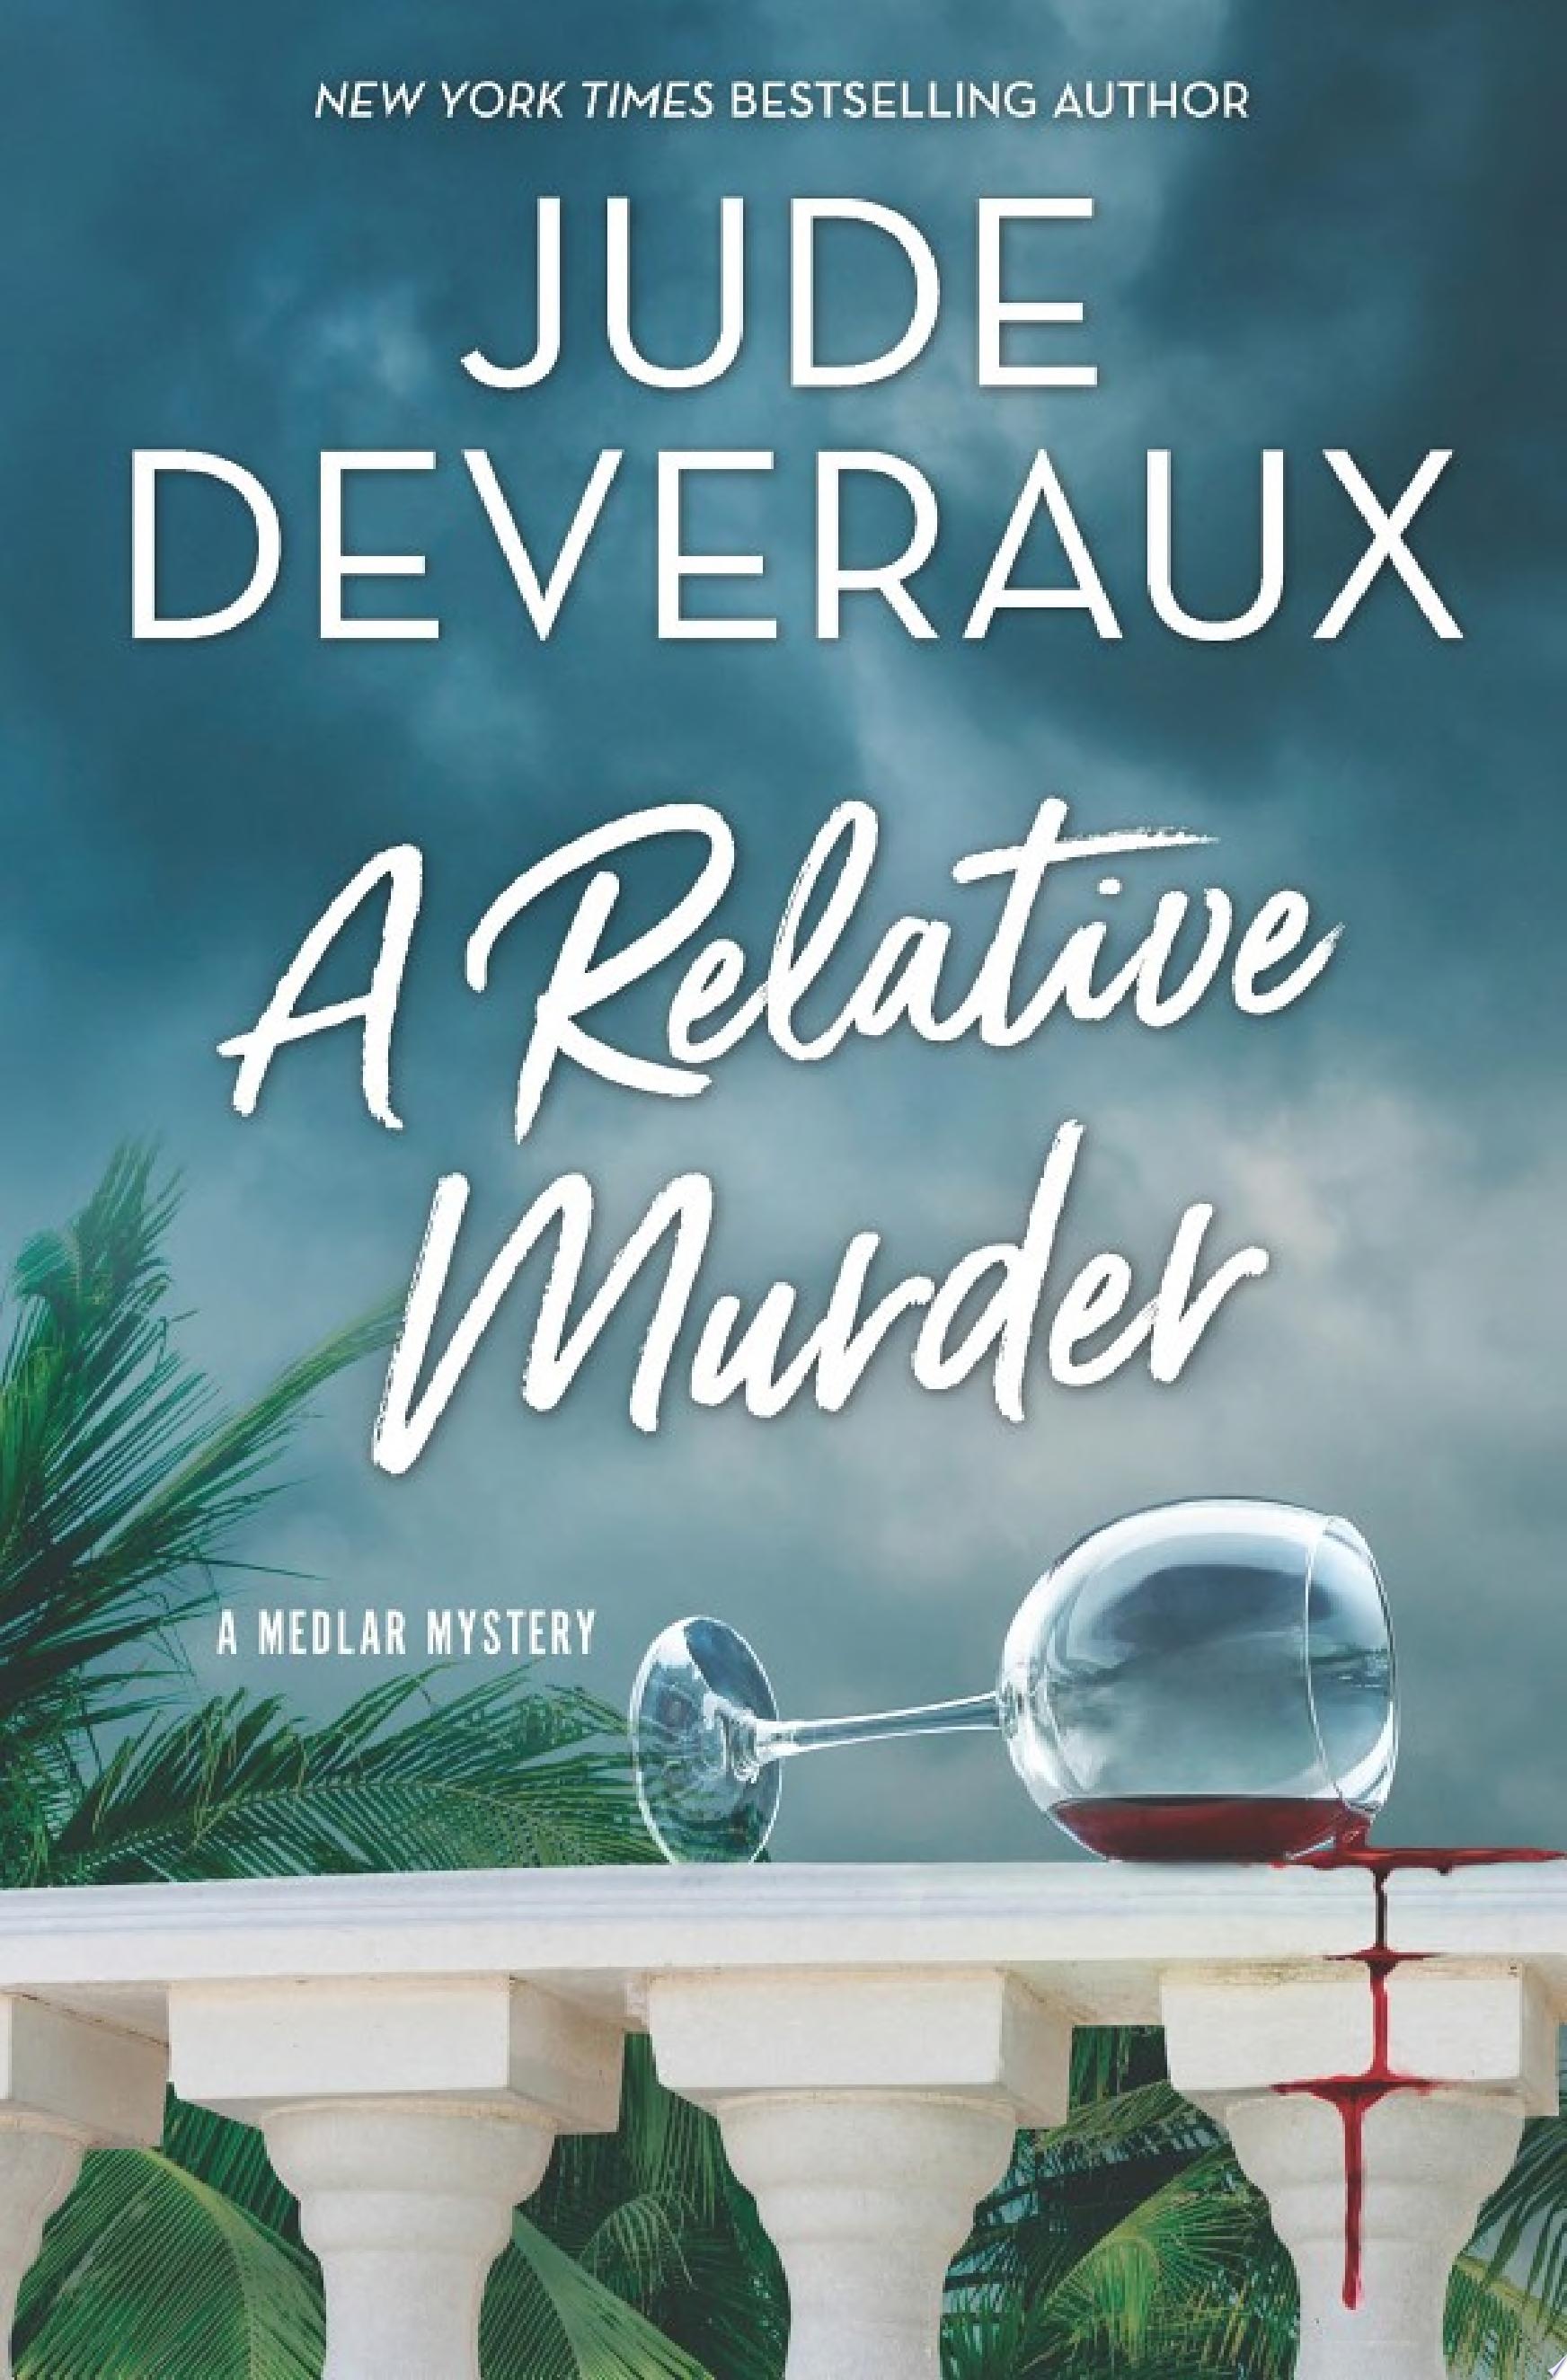 Image for "A Relative Murder"